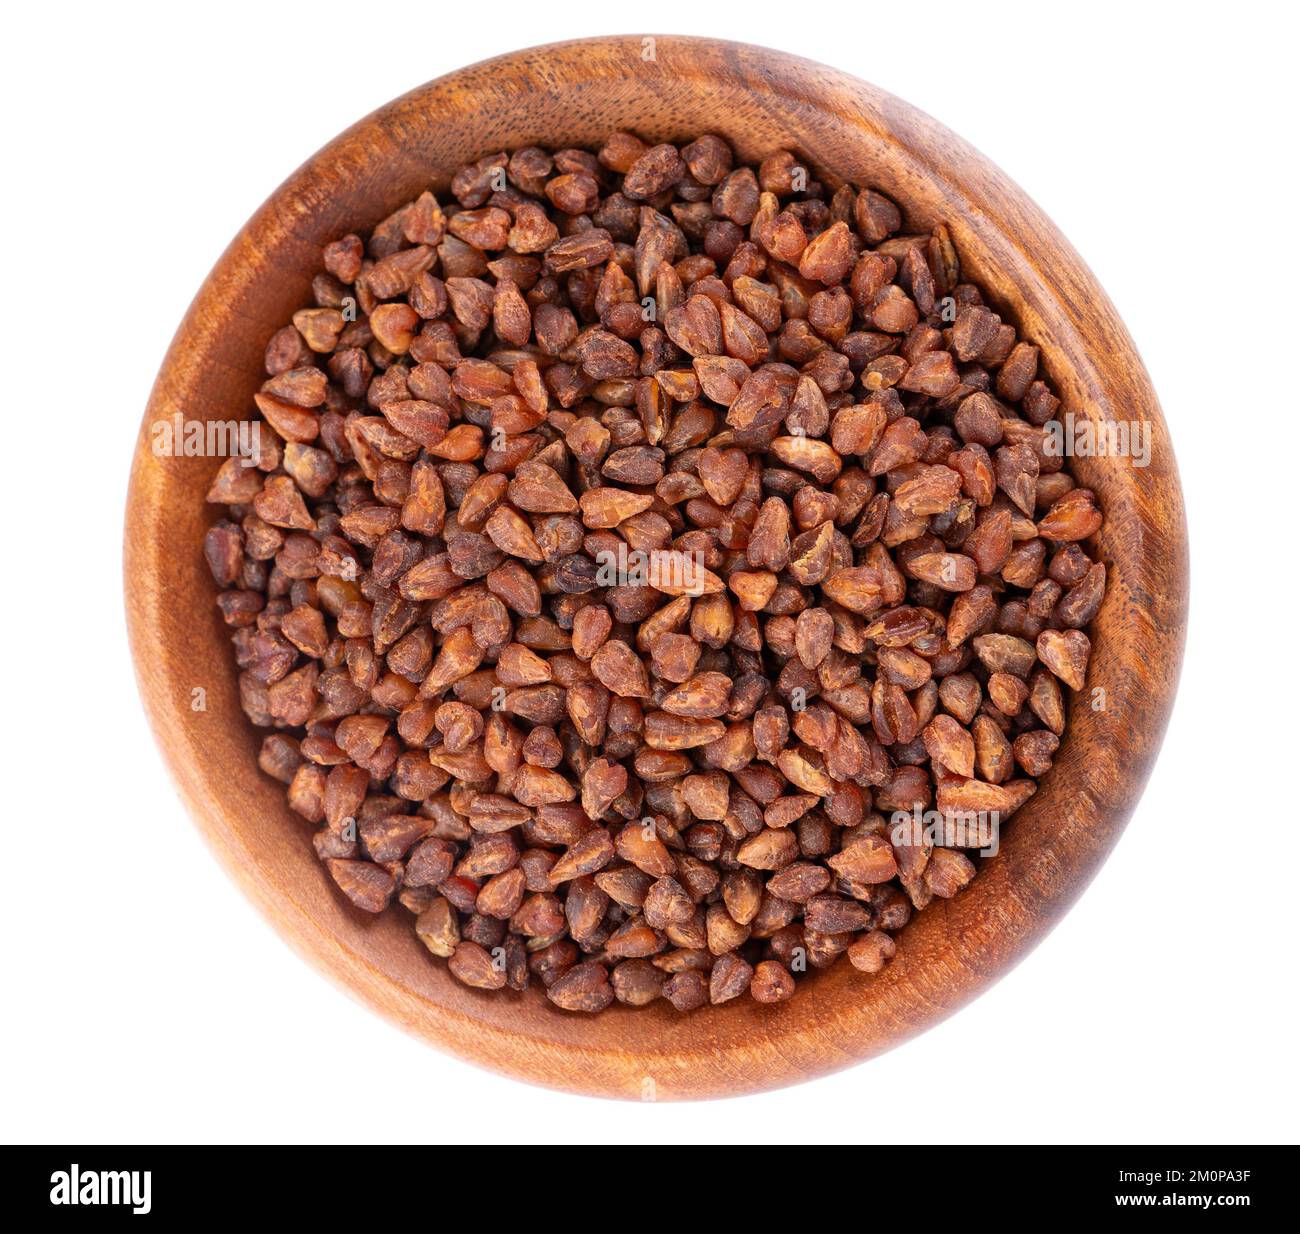 Buckwheat tea in wooden bowl, isolated on white background. Whole roasted buckwheat grains. Fagopyrum tataricum. Top view Stock Photo